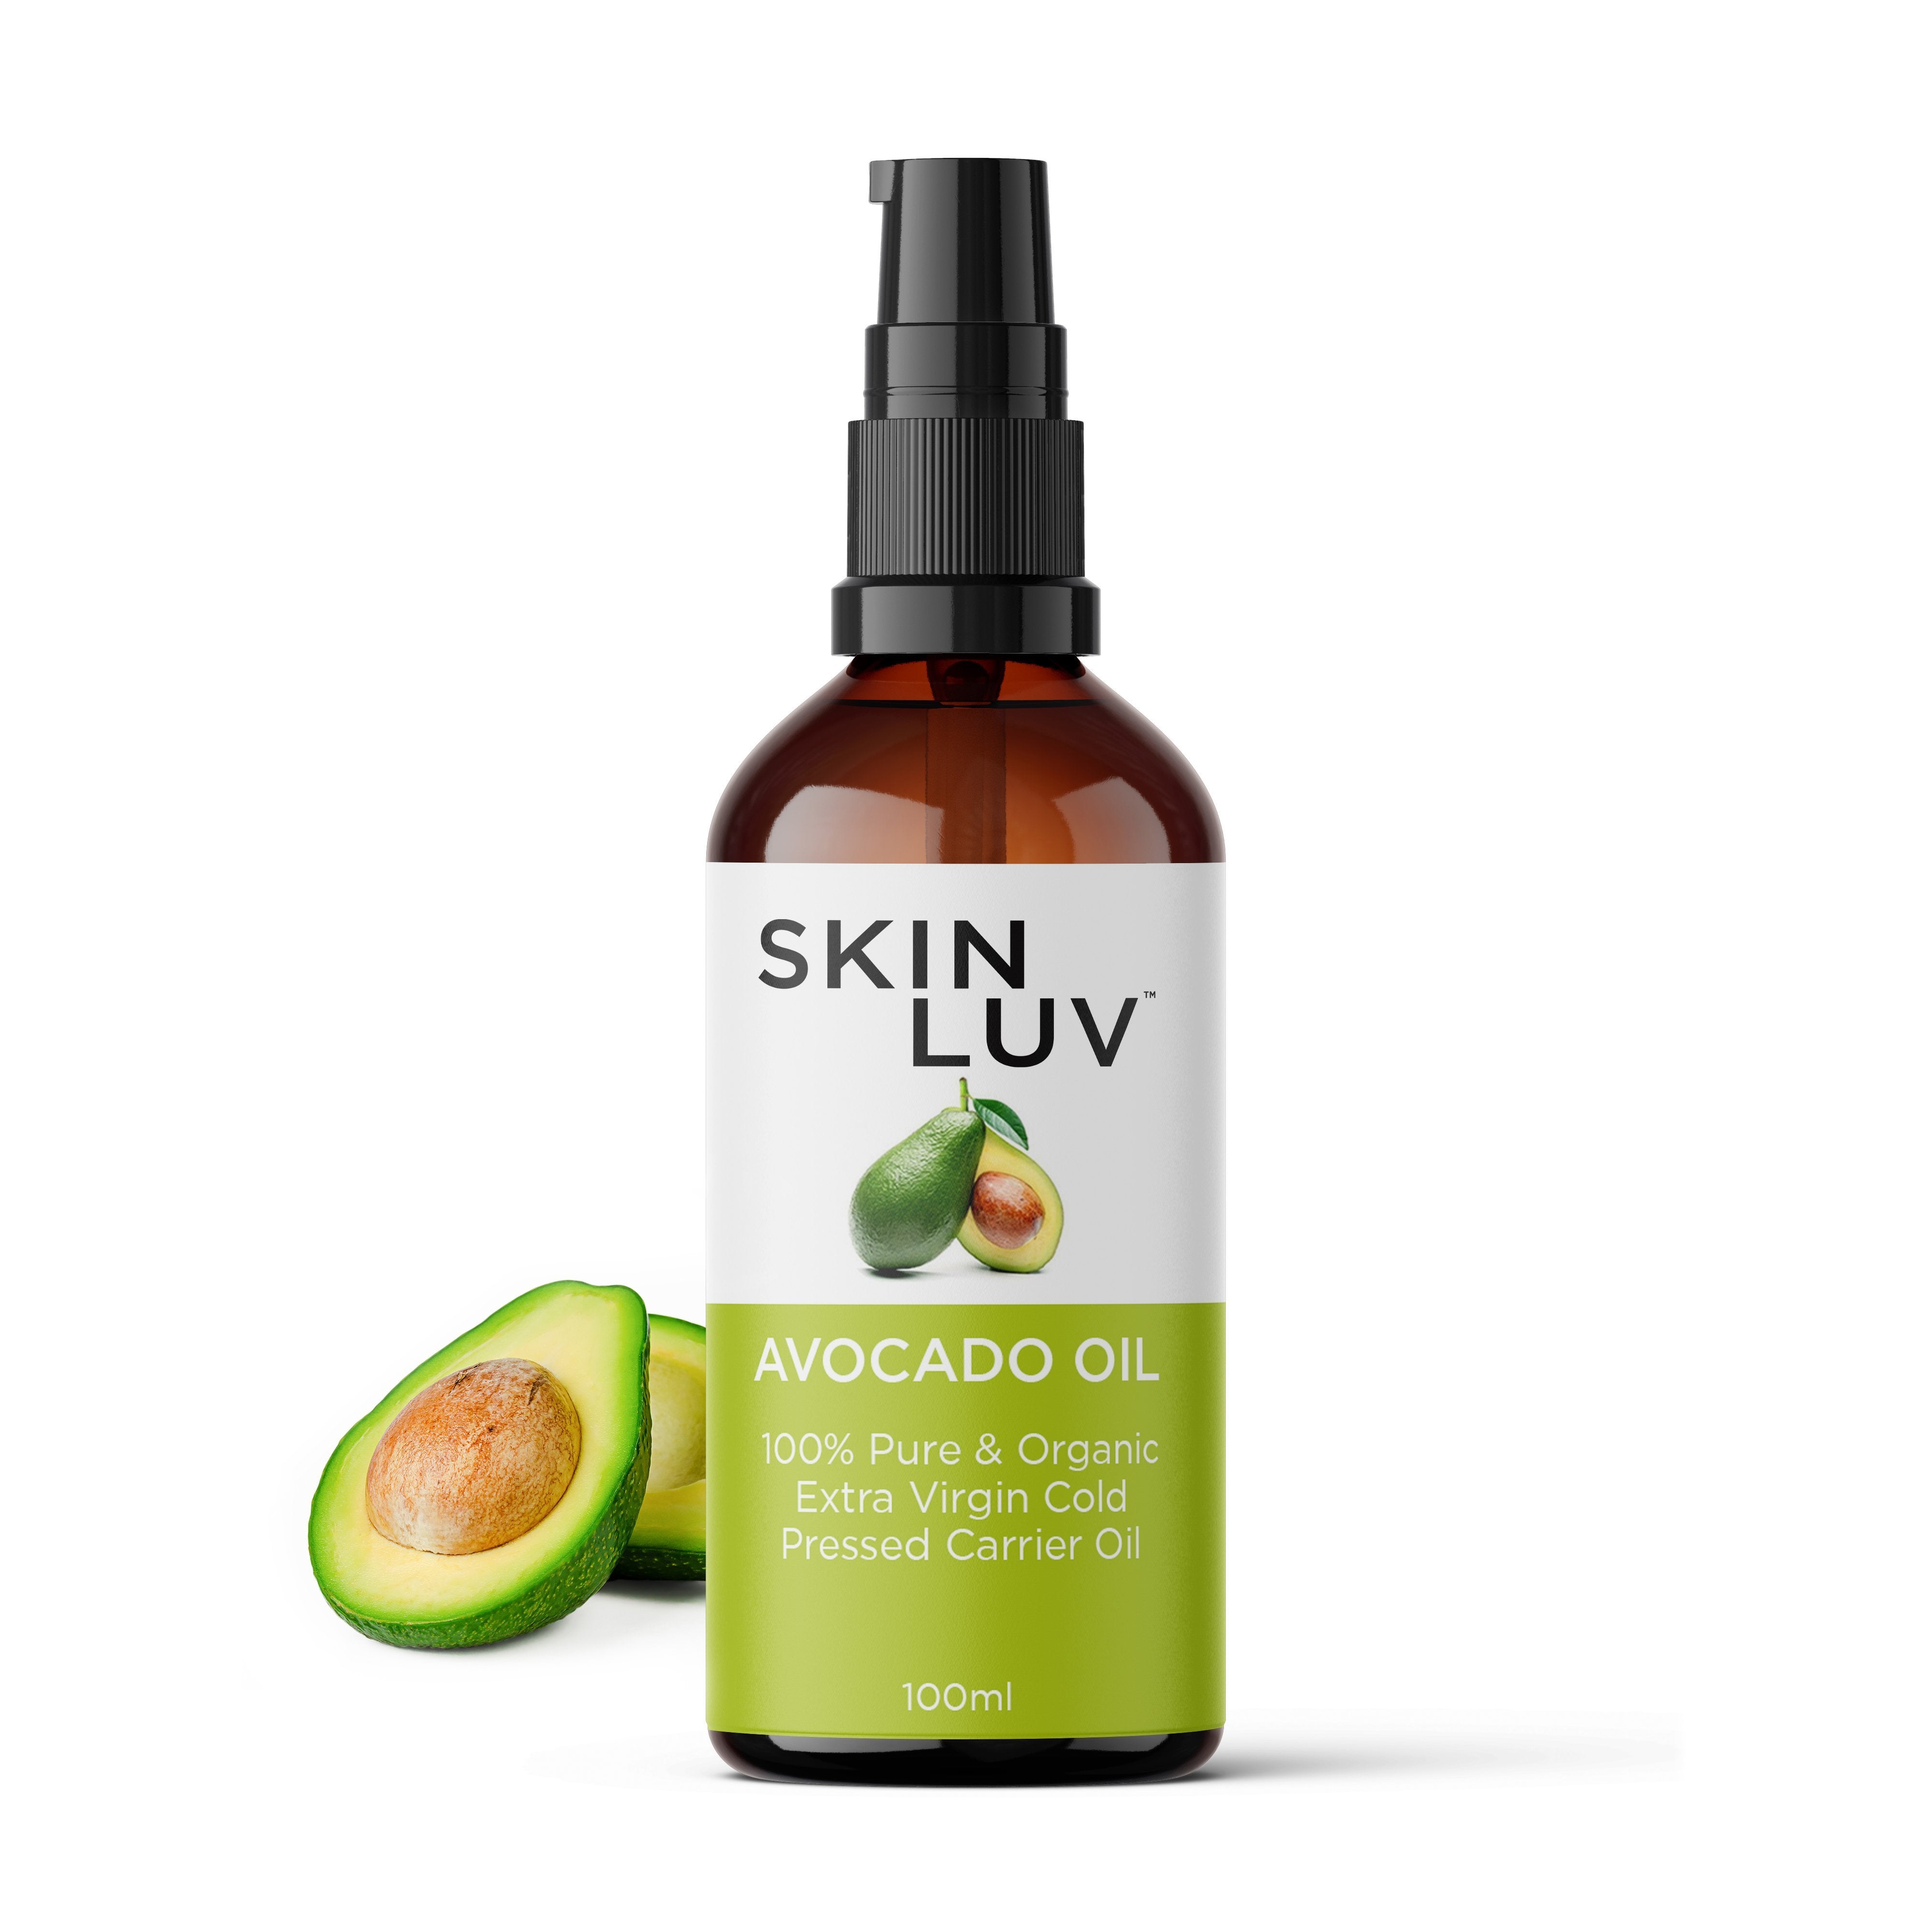 SKINLUV Avocado Oil 100% Pure & Organic Extra Virgin Cold Pressed Carrier Oil 100 ml - Skinluv.in